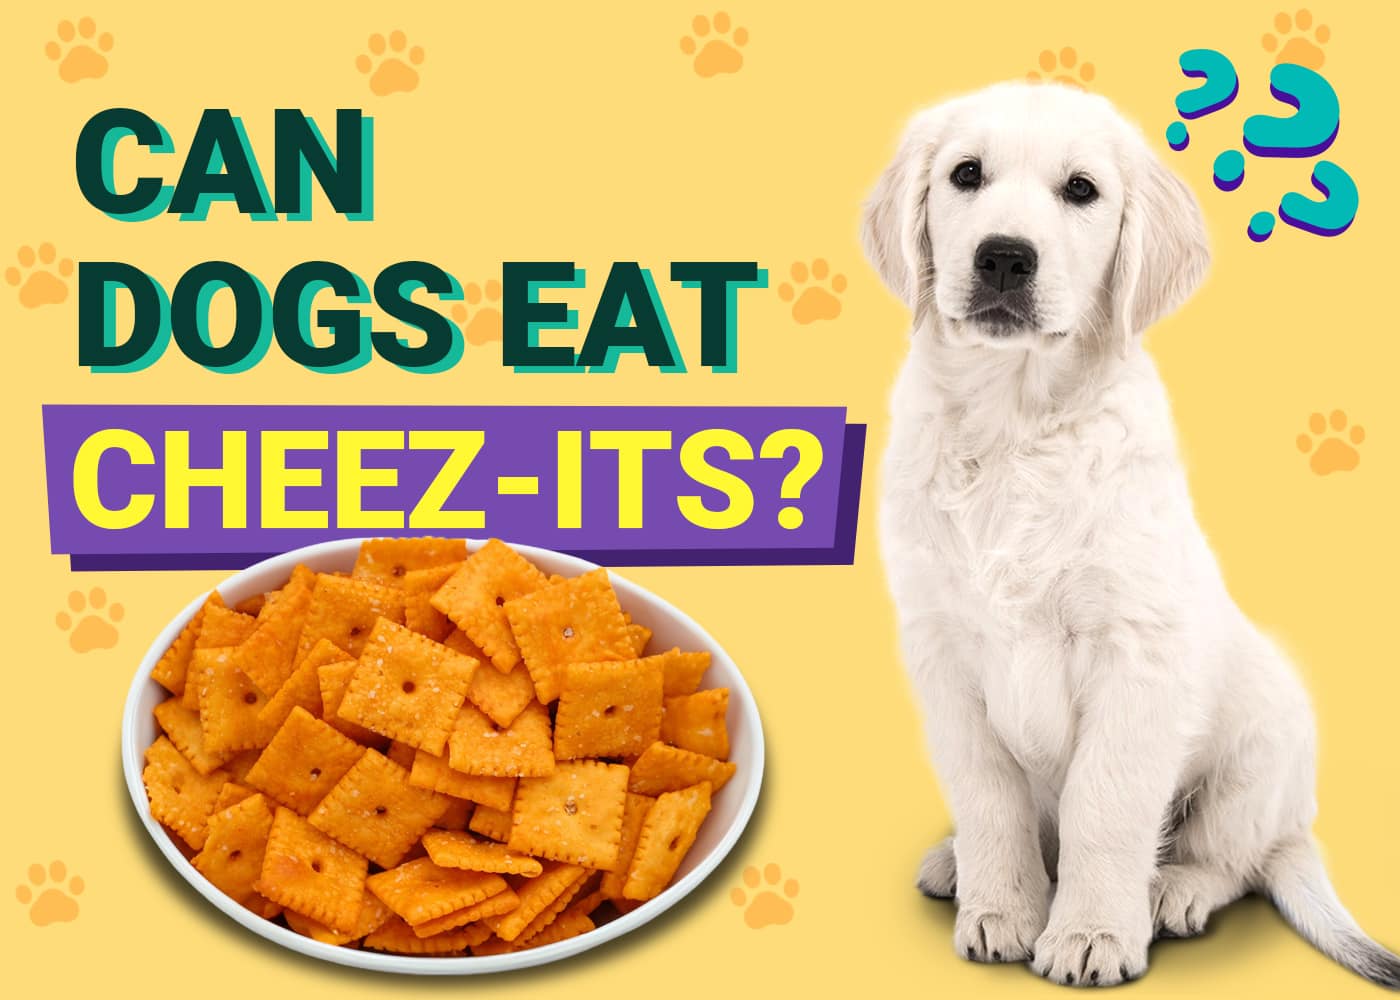 Can Dogs Eat Cheez-Its